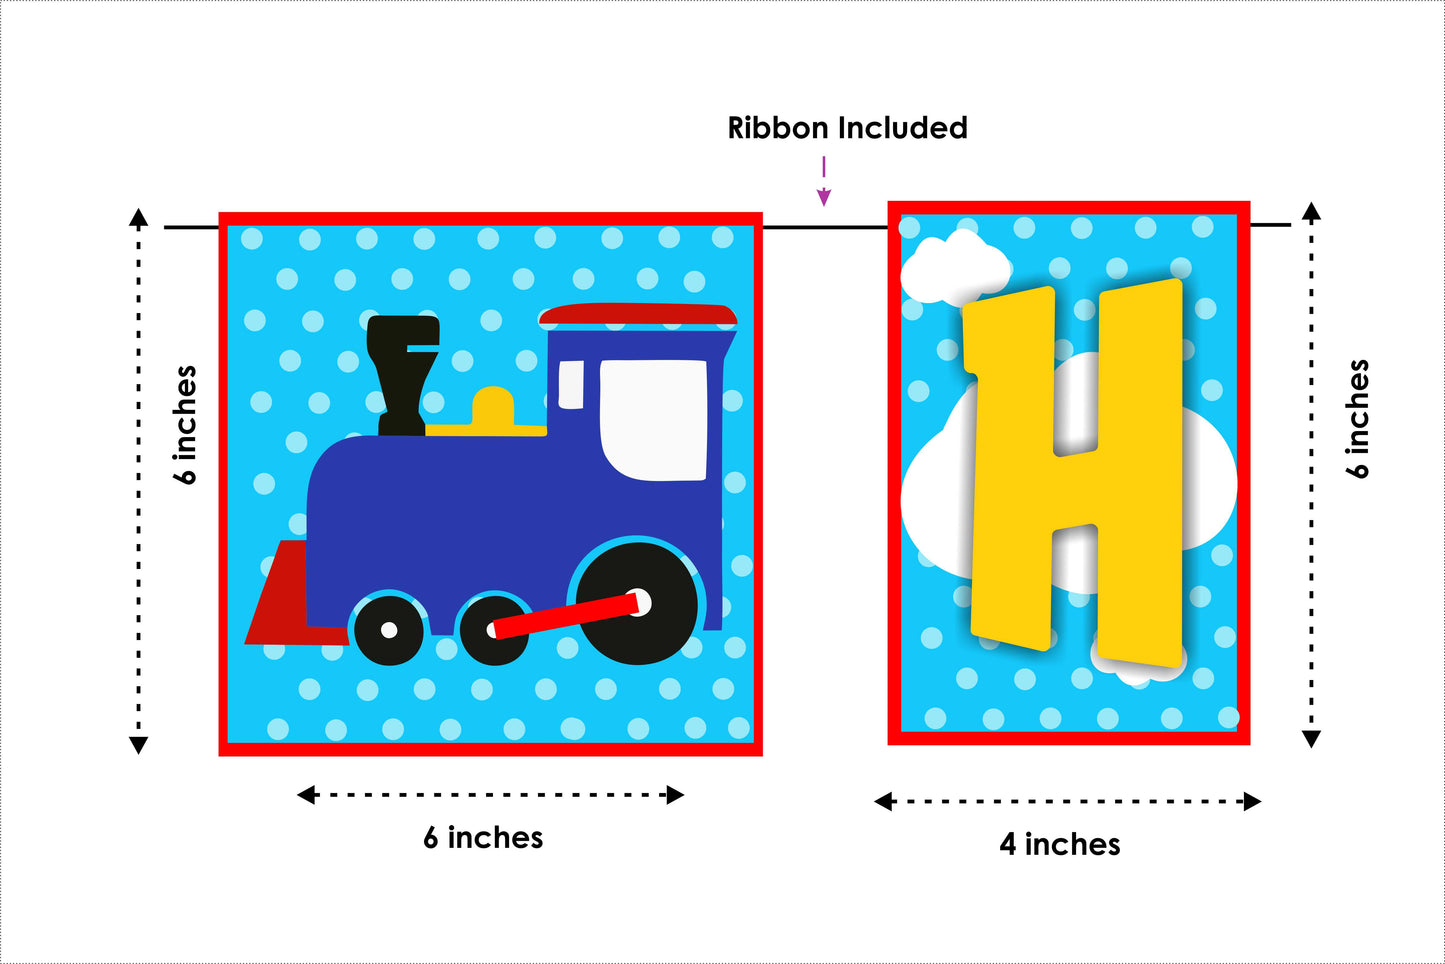 Train Theme Happy Birthday Decoration Hanging and Banner for Photo Shoot Backdrop and Theme Party